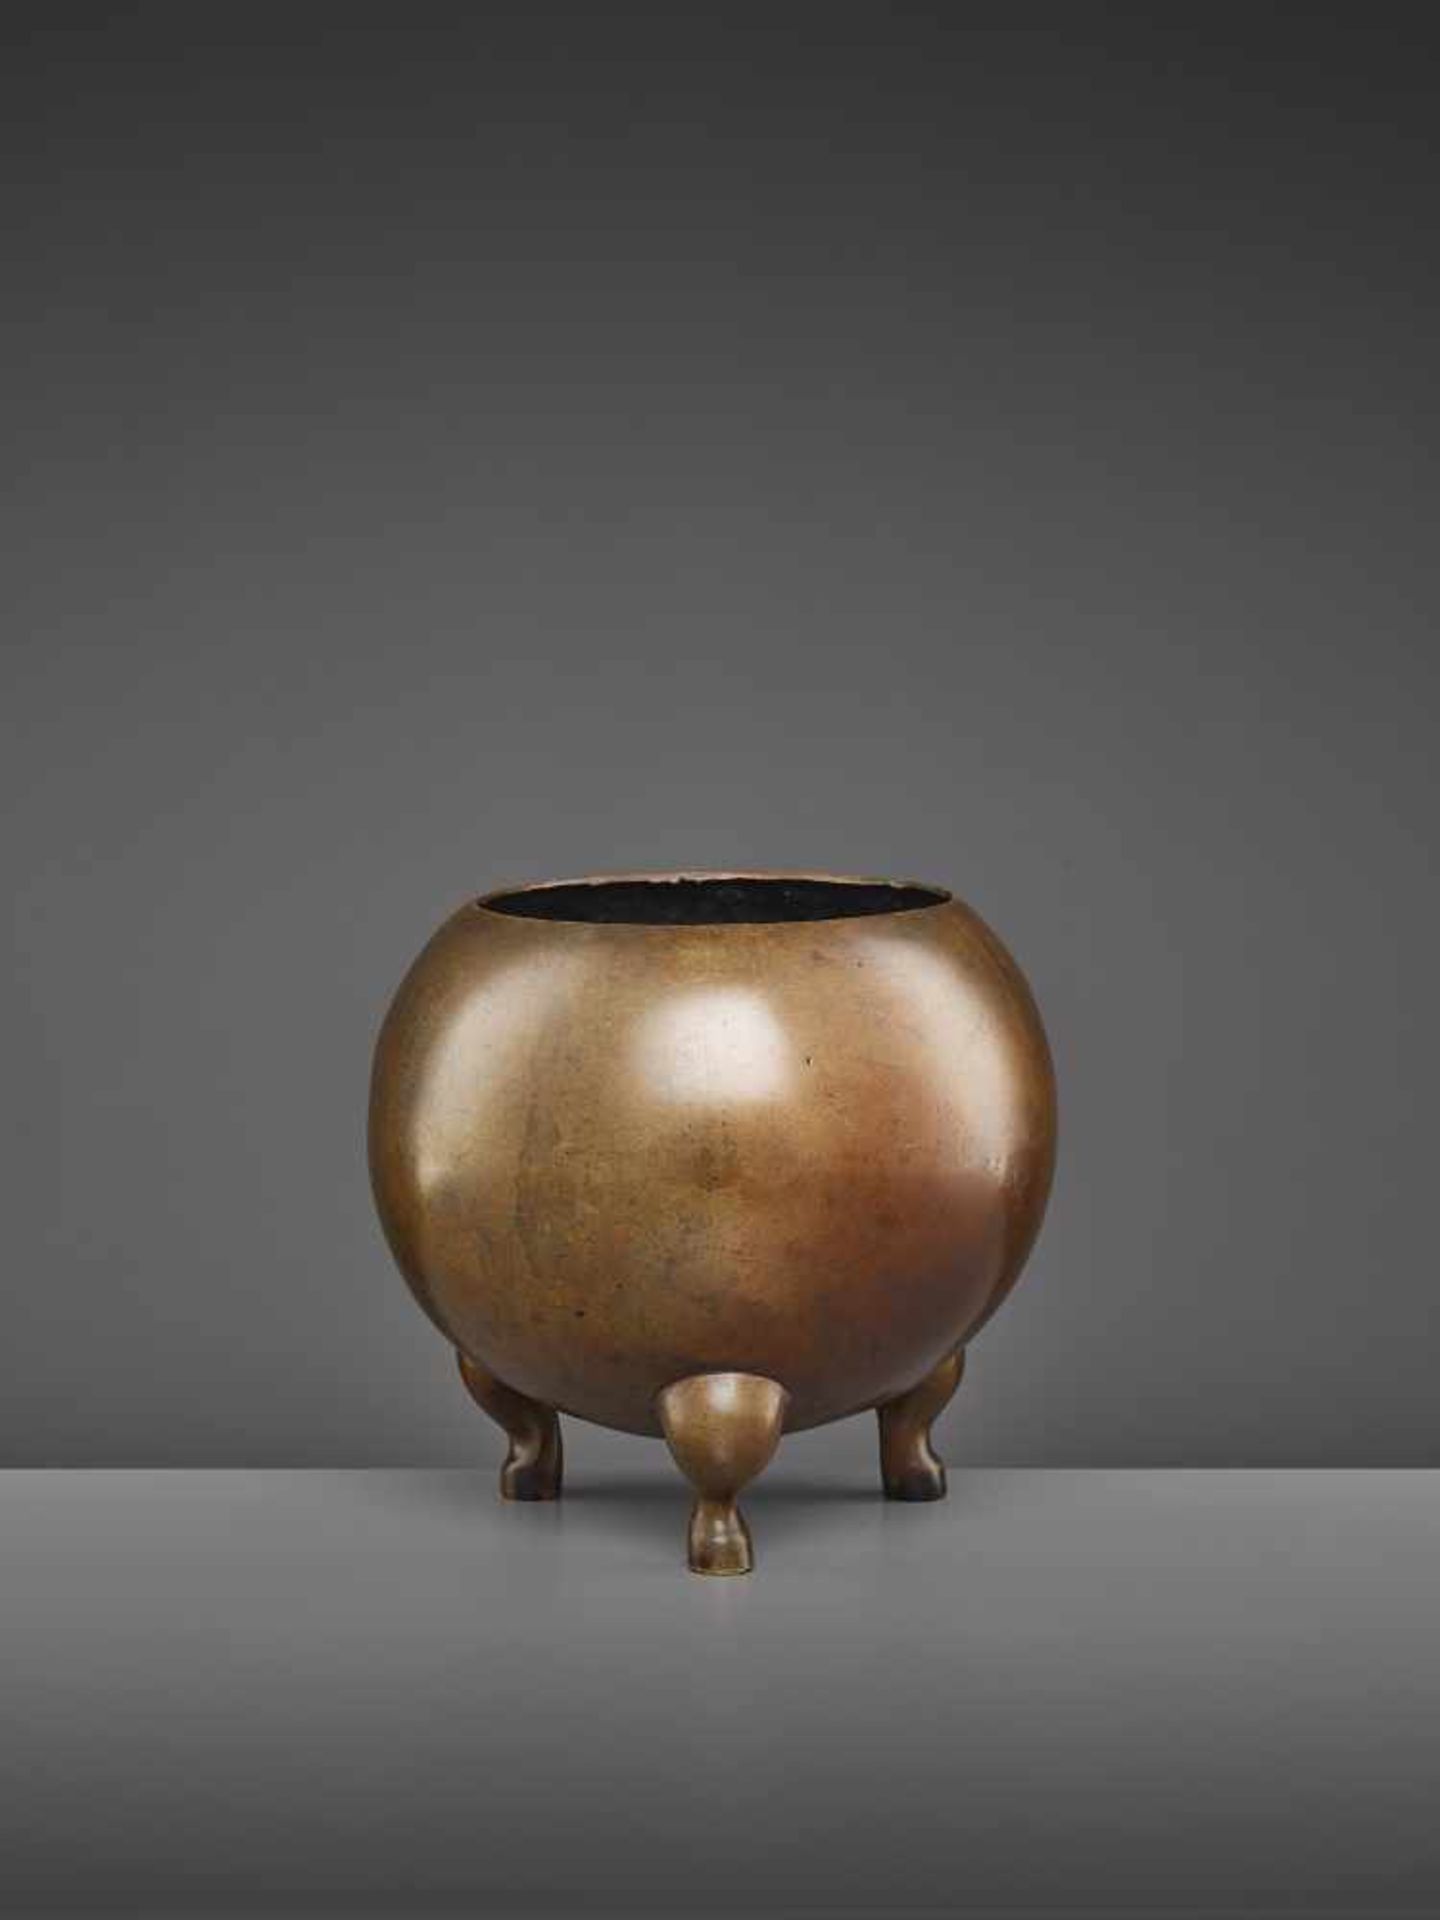 A RARE TRIPOD CENSER EARLY QINGChina, late 17th-earlier 18th century. The large vessel of simple yet - Image 3 of 9